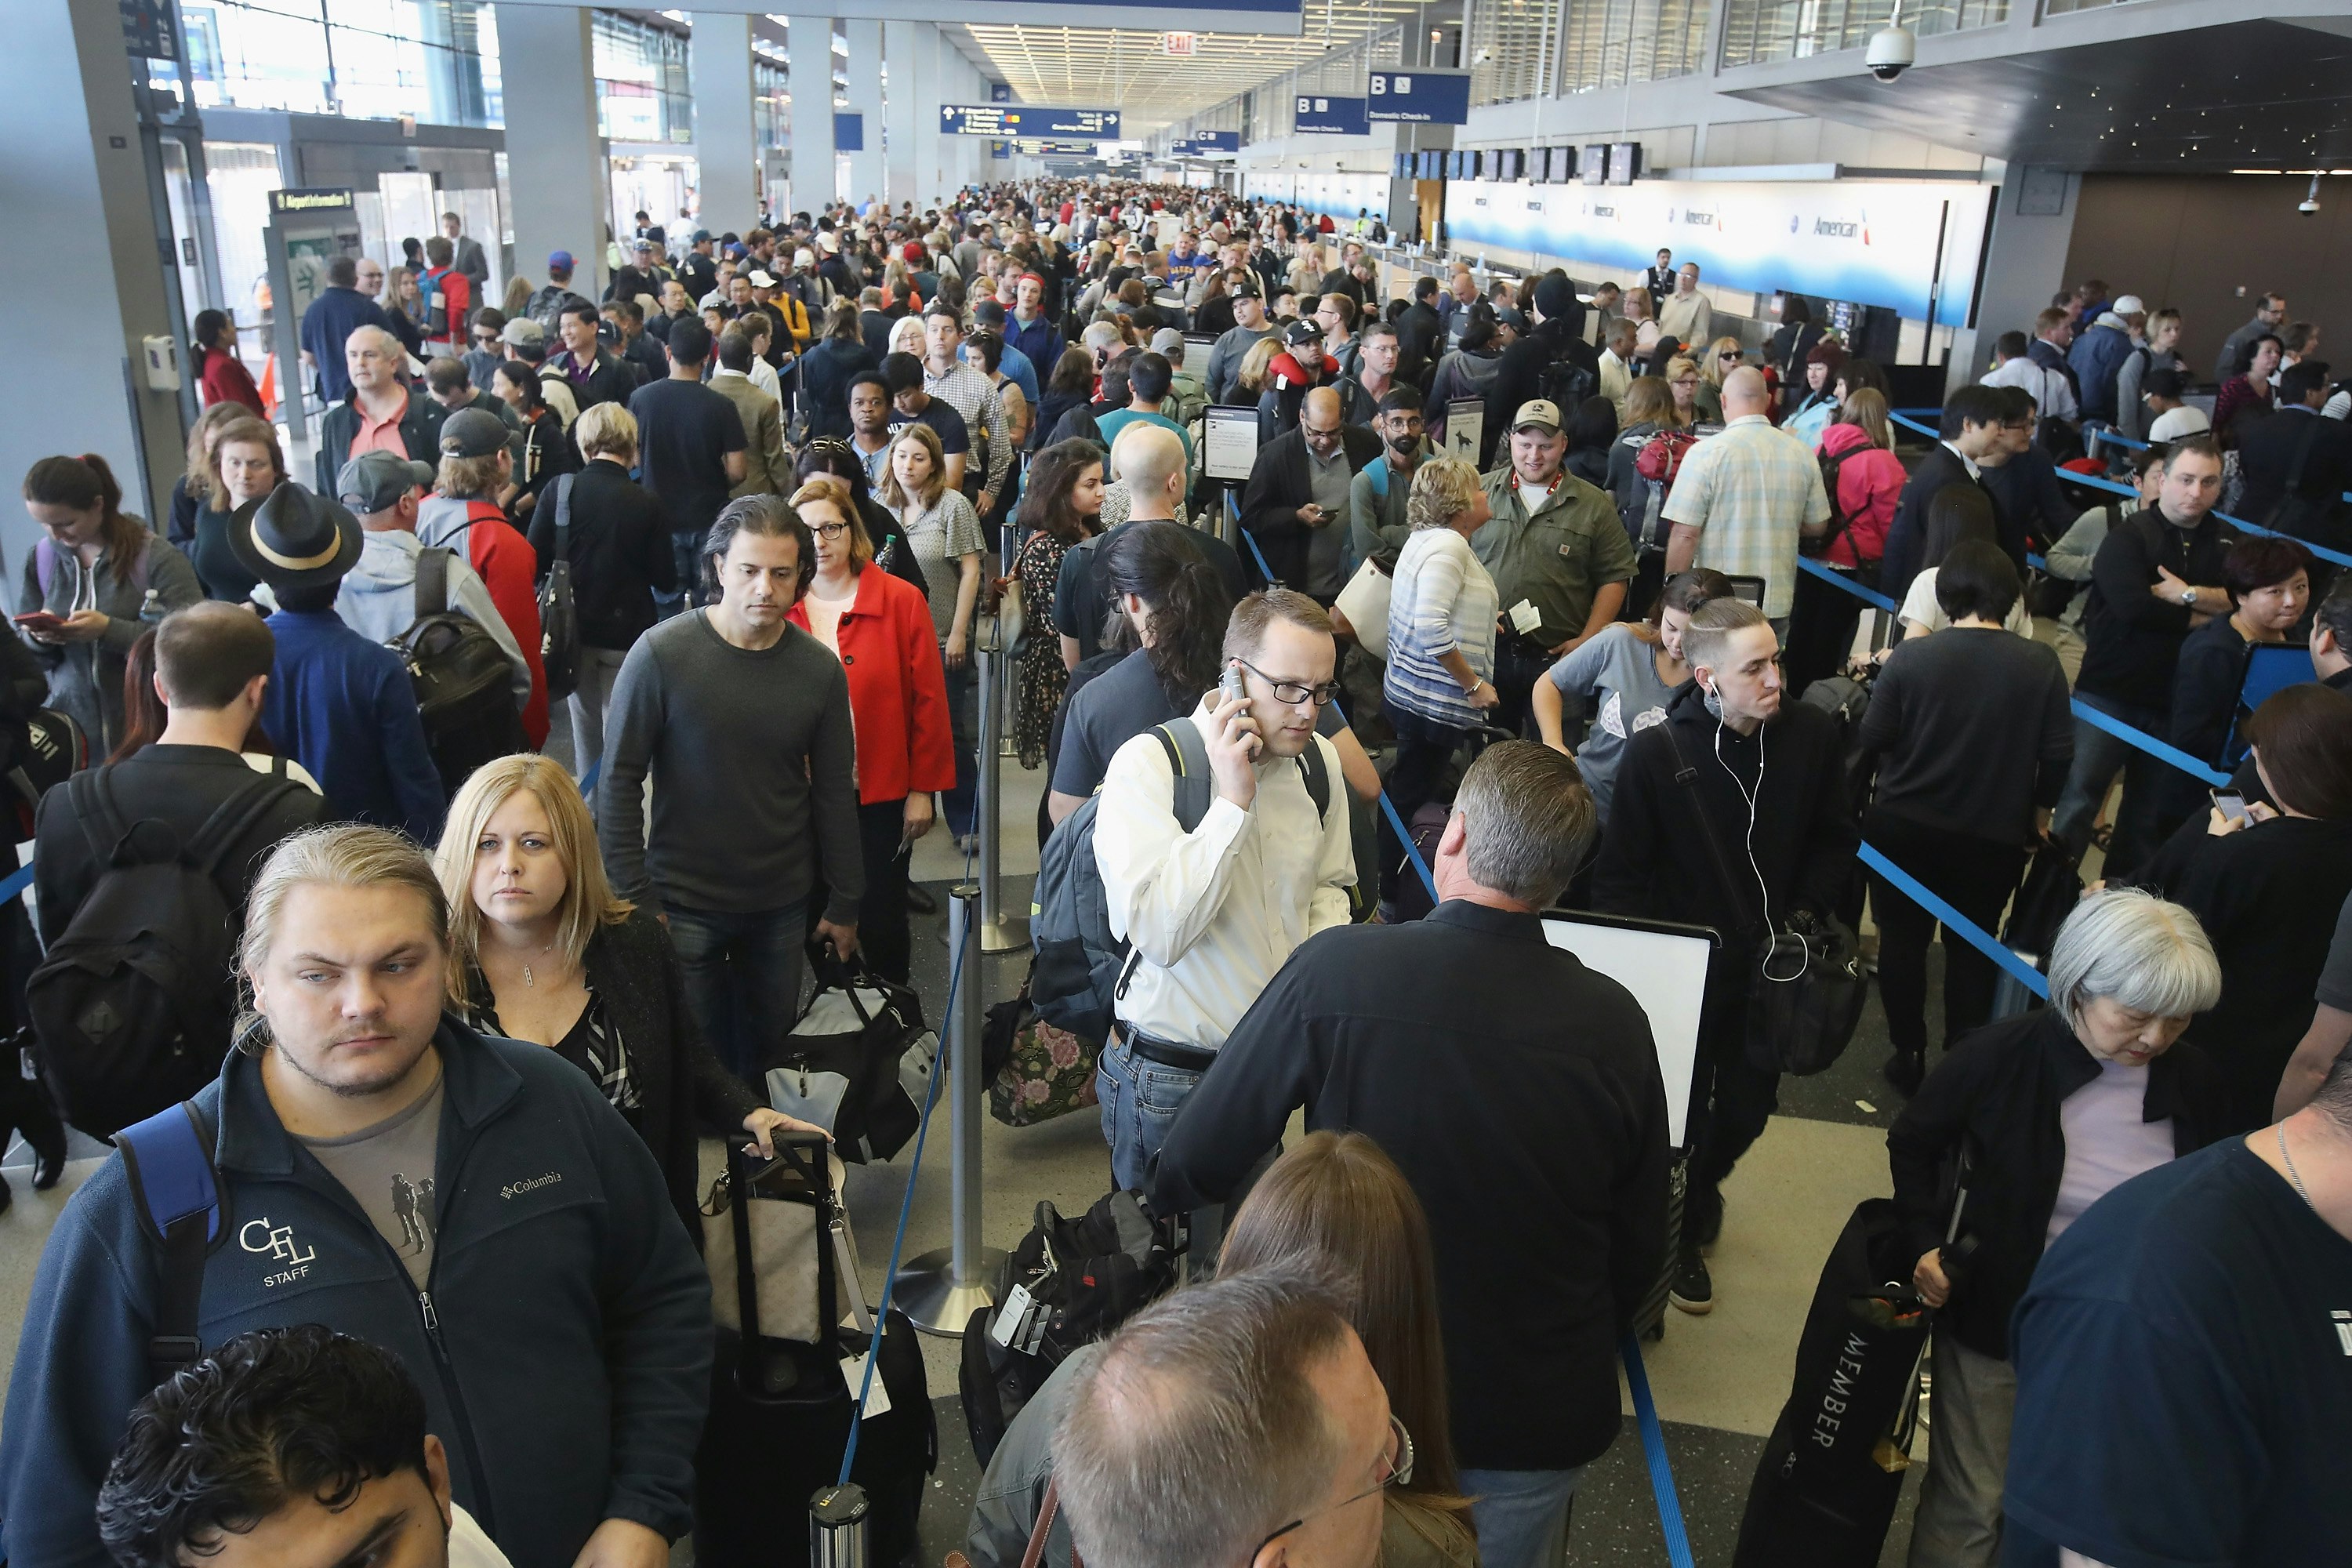 Crowds on line for security screening.jpg